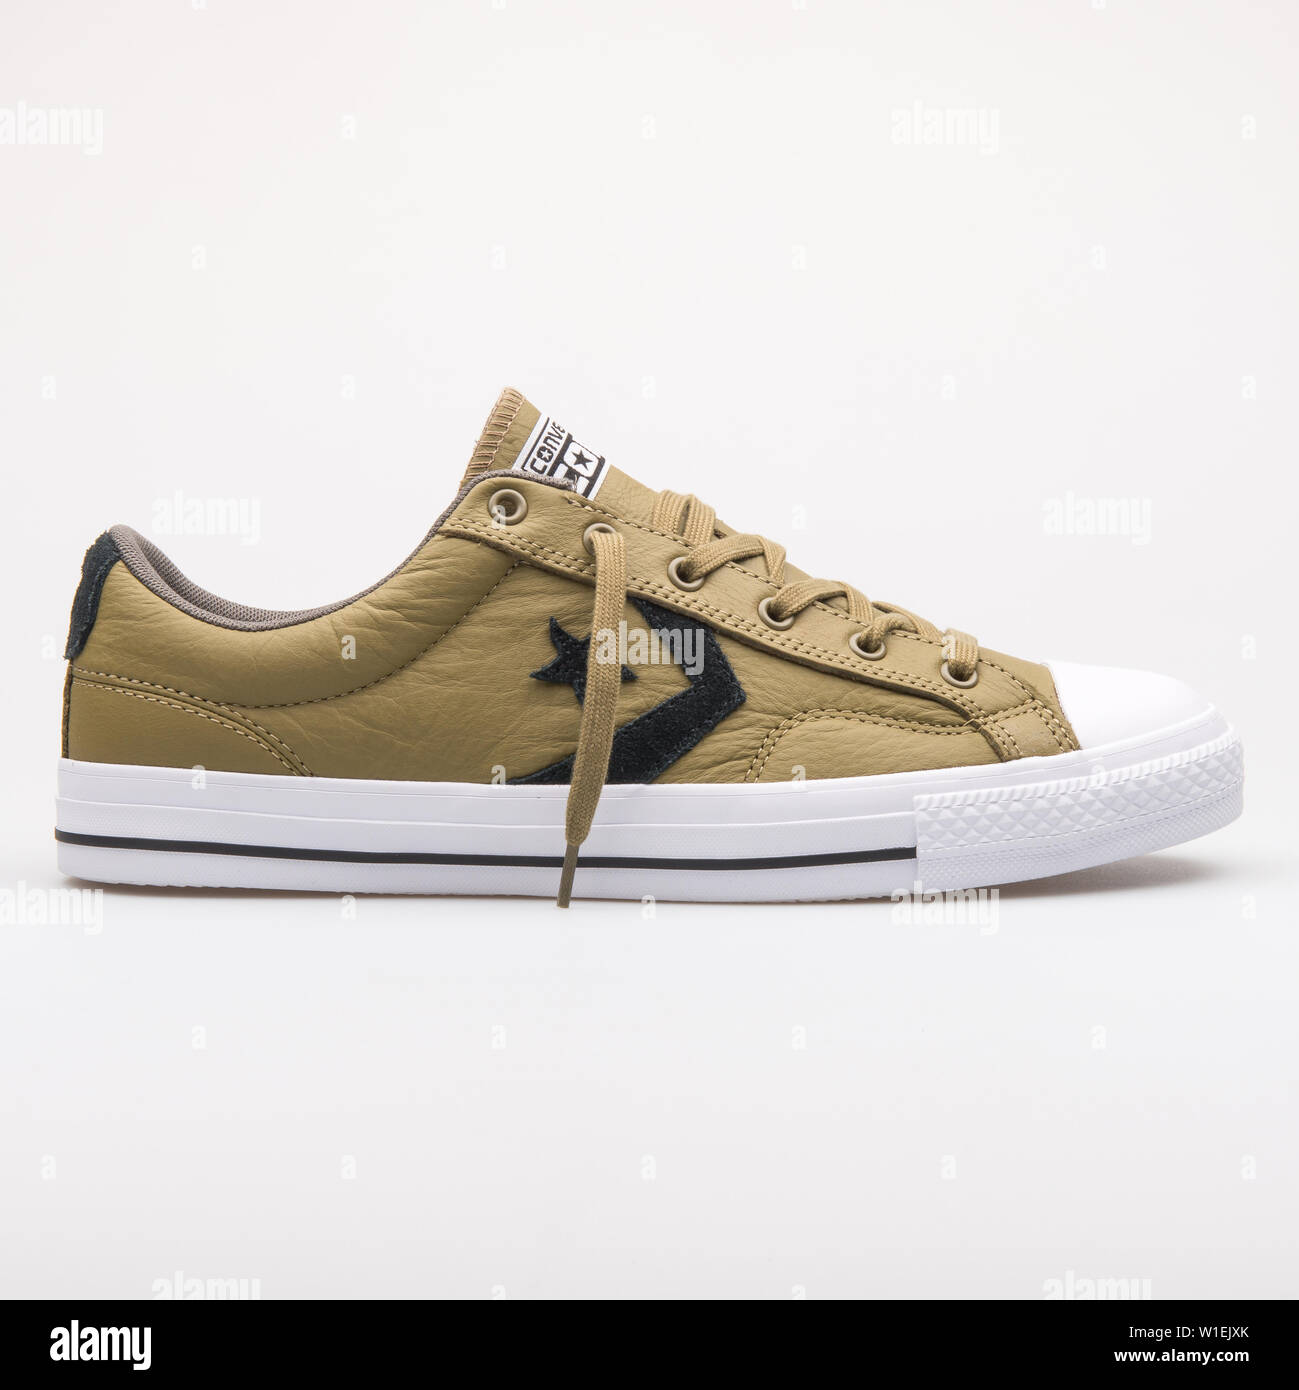 VIENNA, - AUGUST 23, Converse Chuck Taylor All Star Player Leather OX olive green sneaker on white background Stock Photo - Alamy